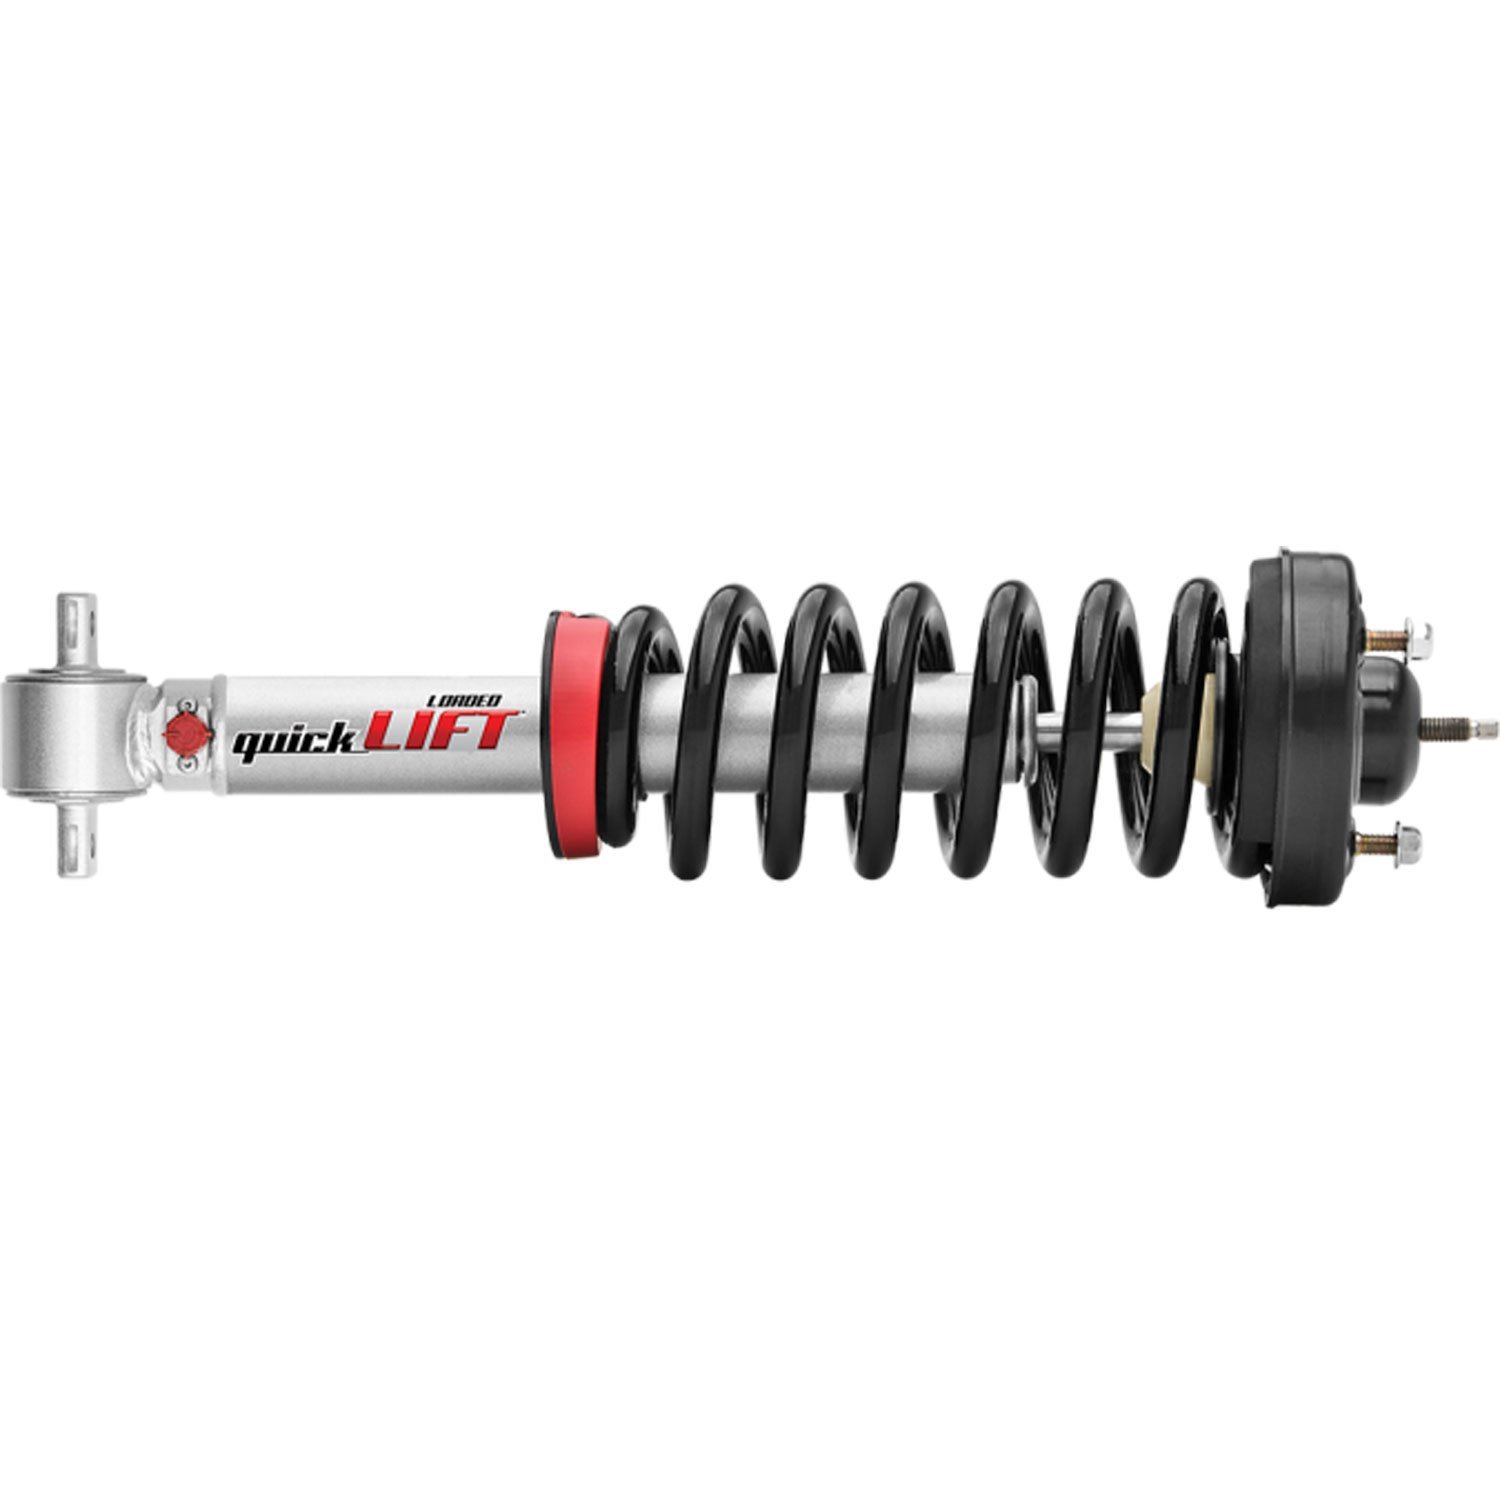 QuickLift Complete Strut Assembly Fits GM 1/2-ton Pickups and SUVs